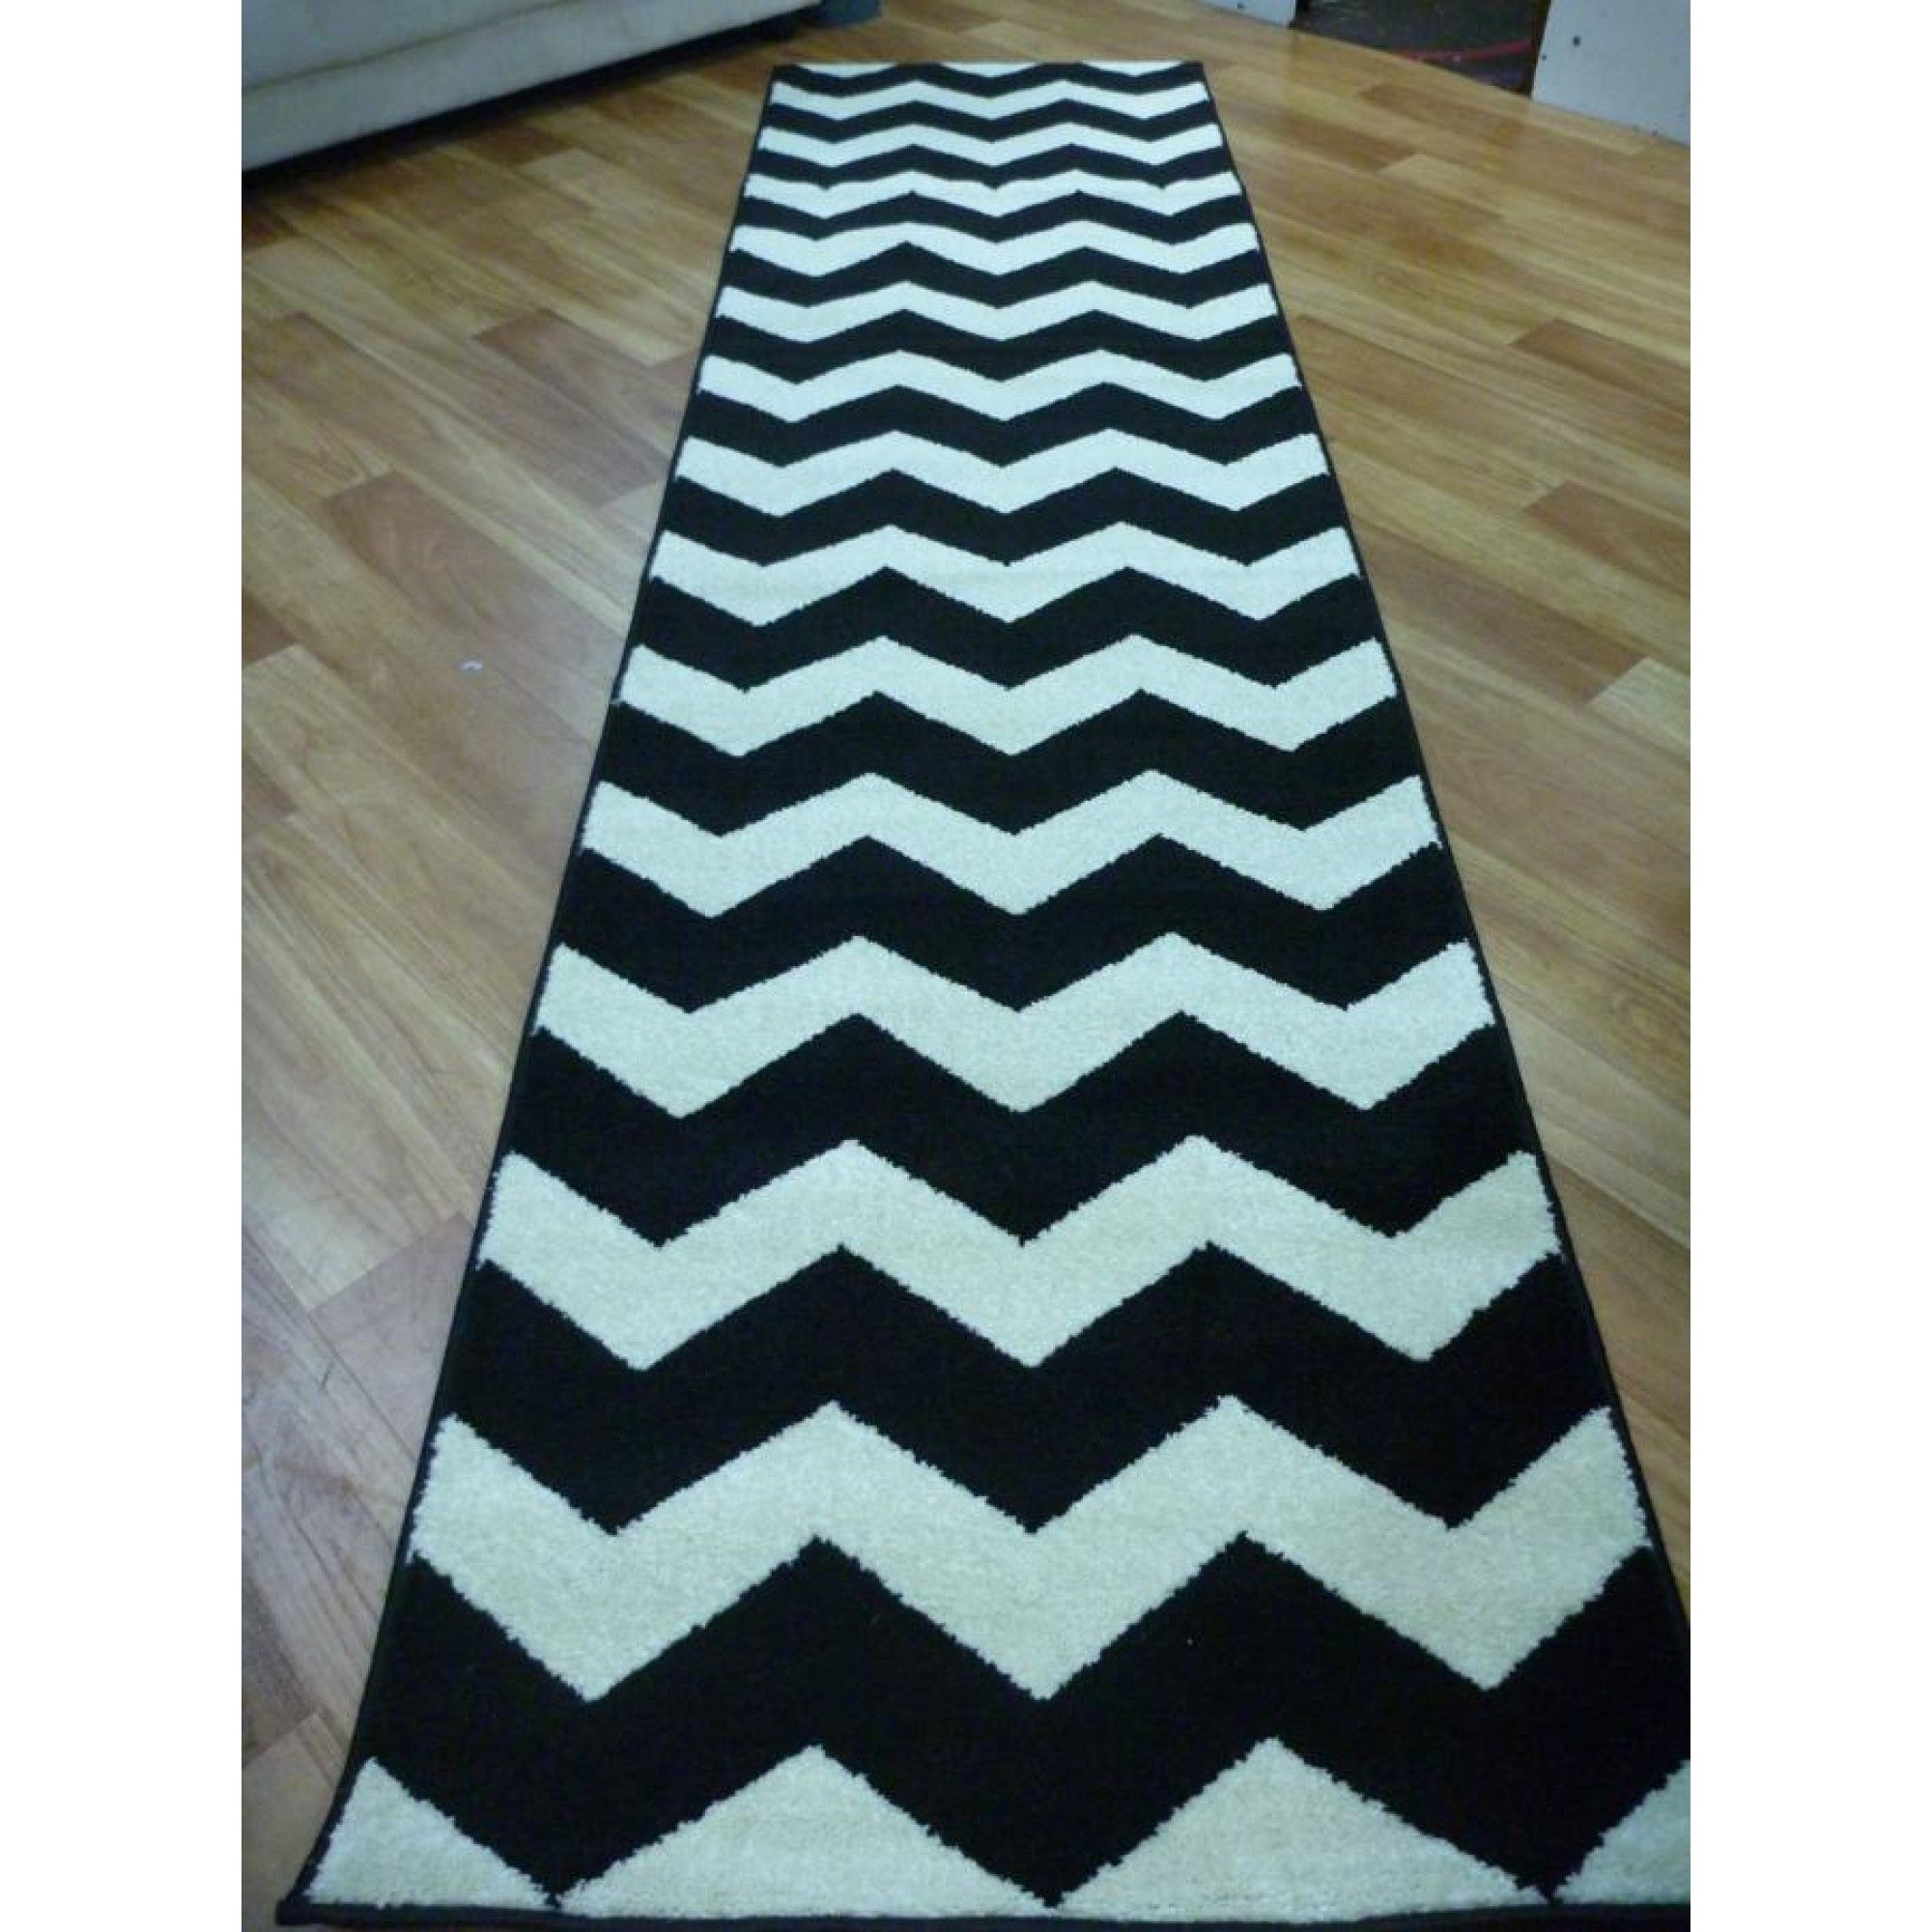 Chevron Modern Hallway Runners Free Shipping Australia Wide Kids Intended For Modern Hallway Runners (View 2 of 20)